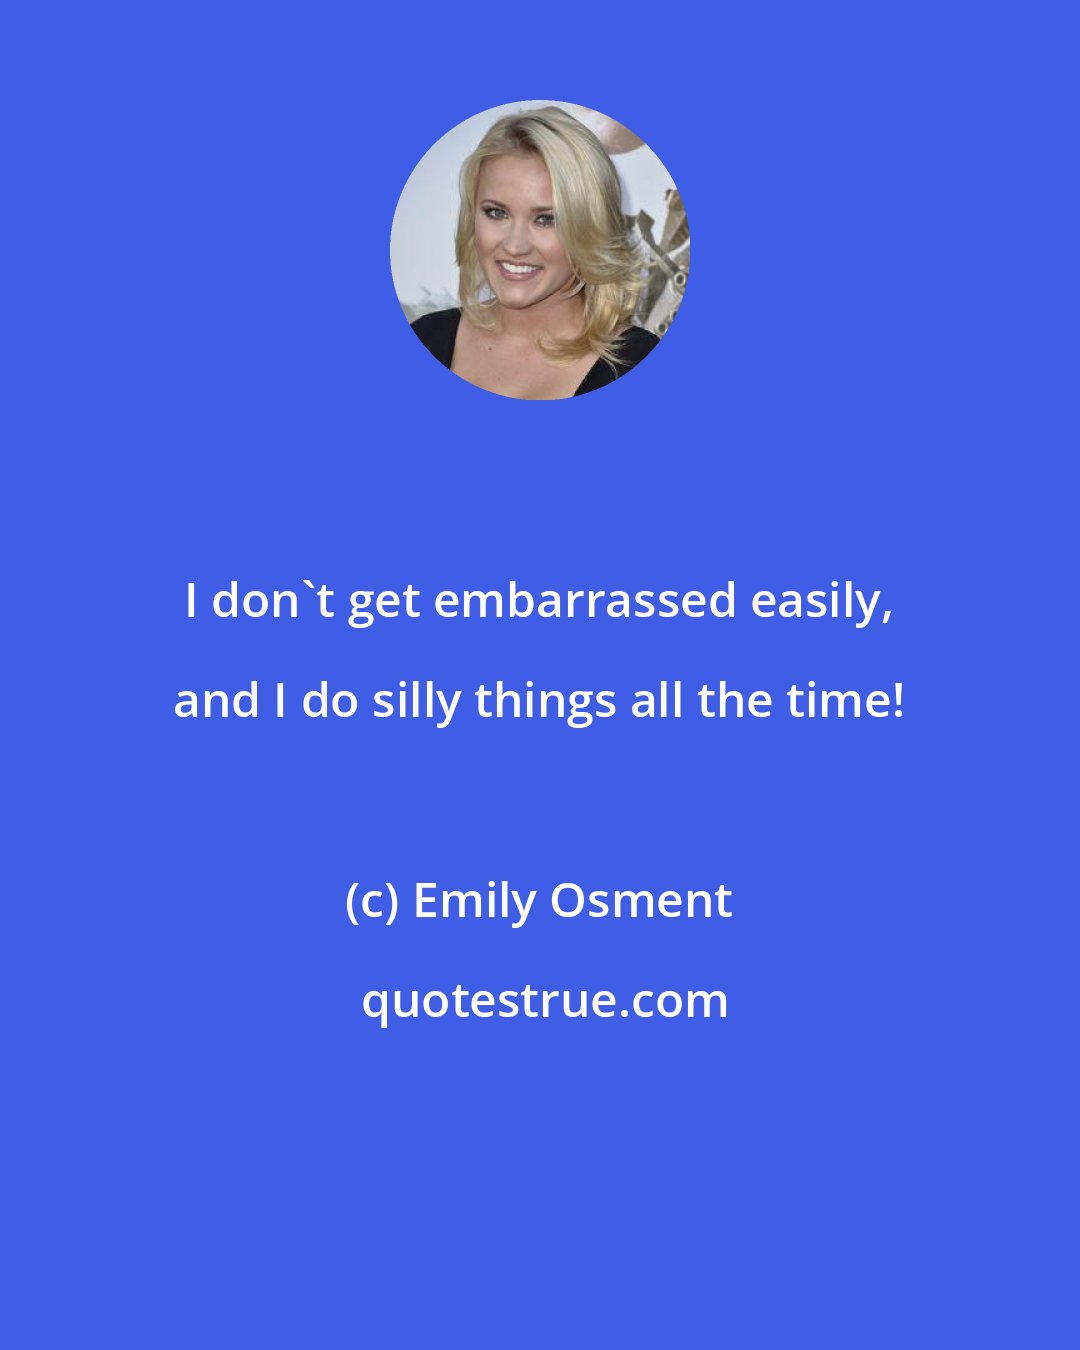 Emily Osment: I don't get embarrassed easily, and I do silly things all the time!